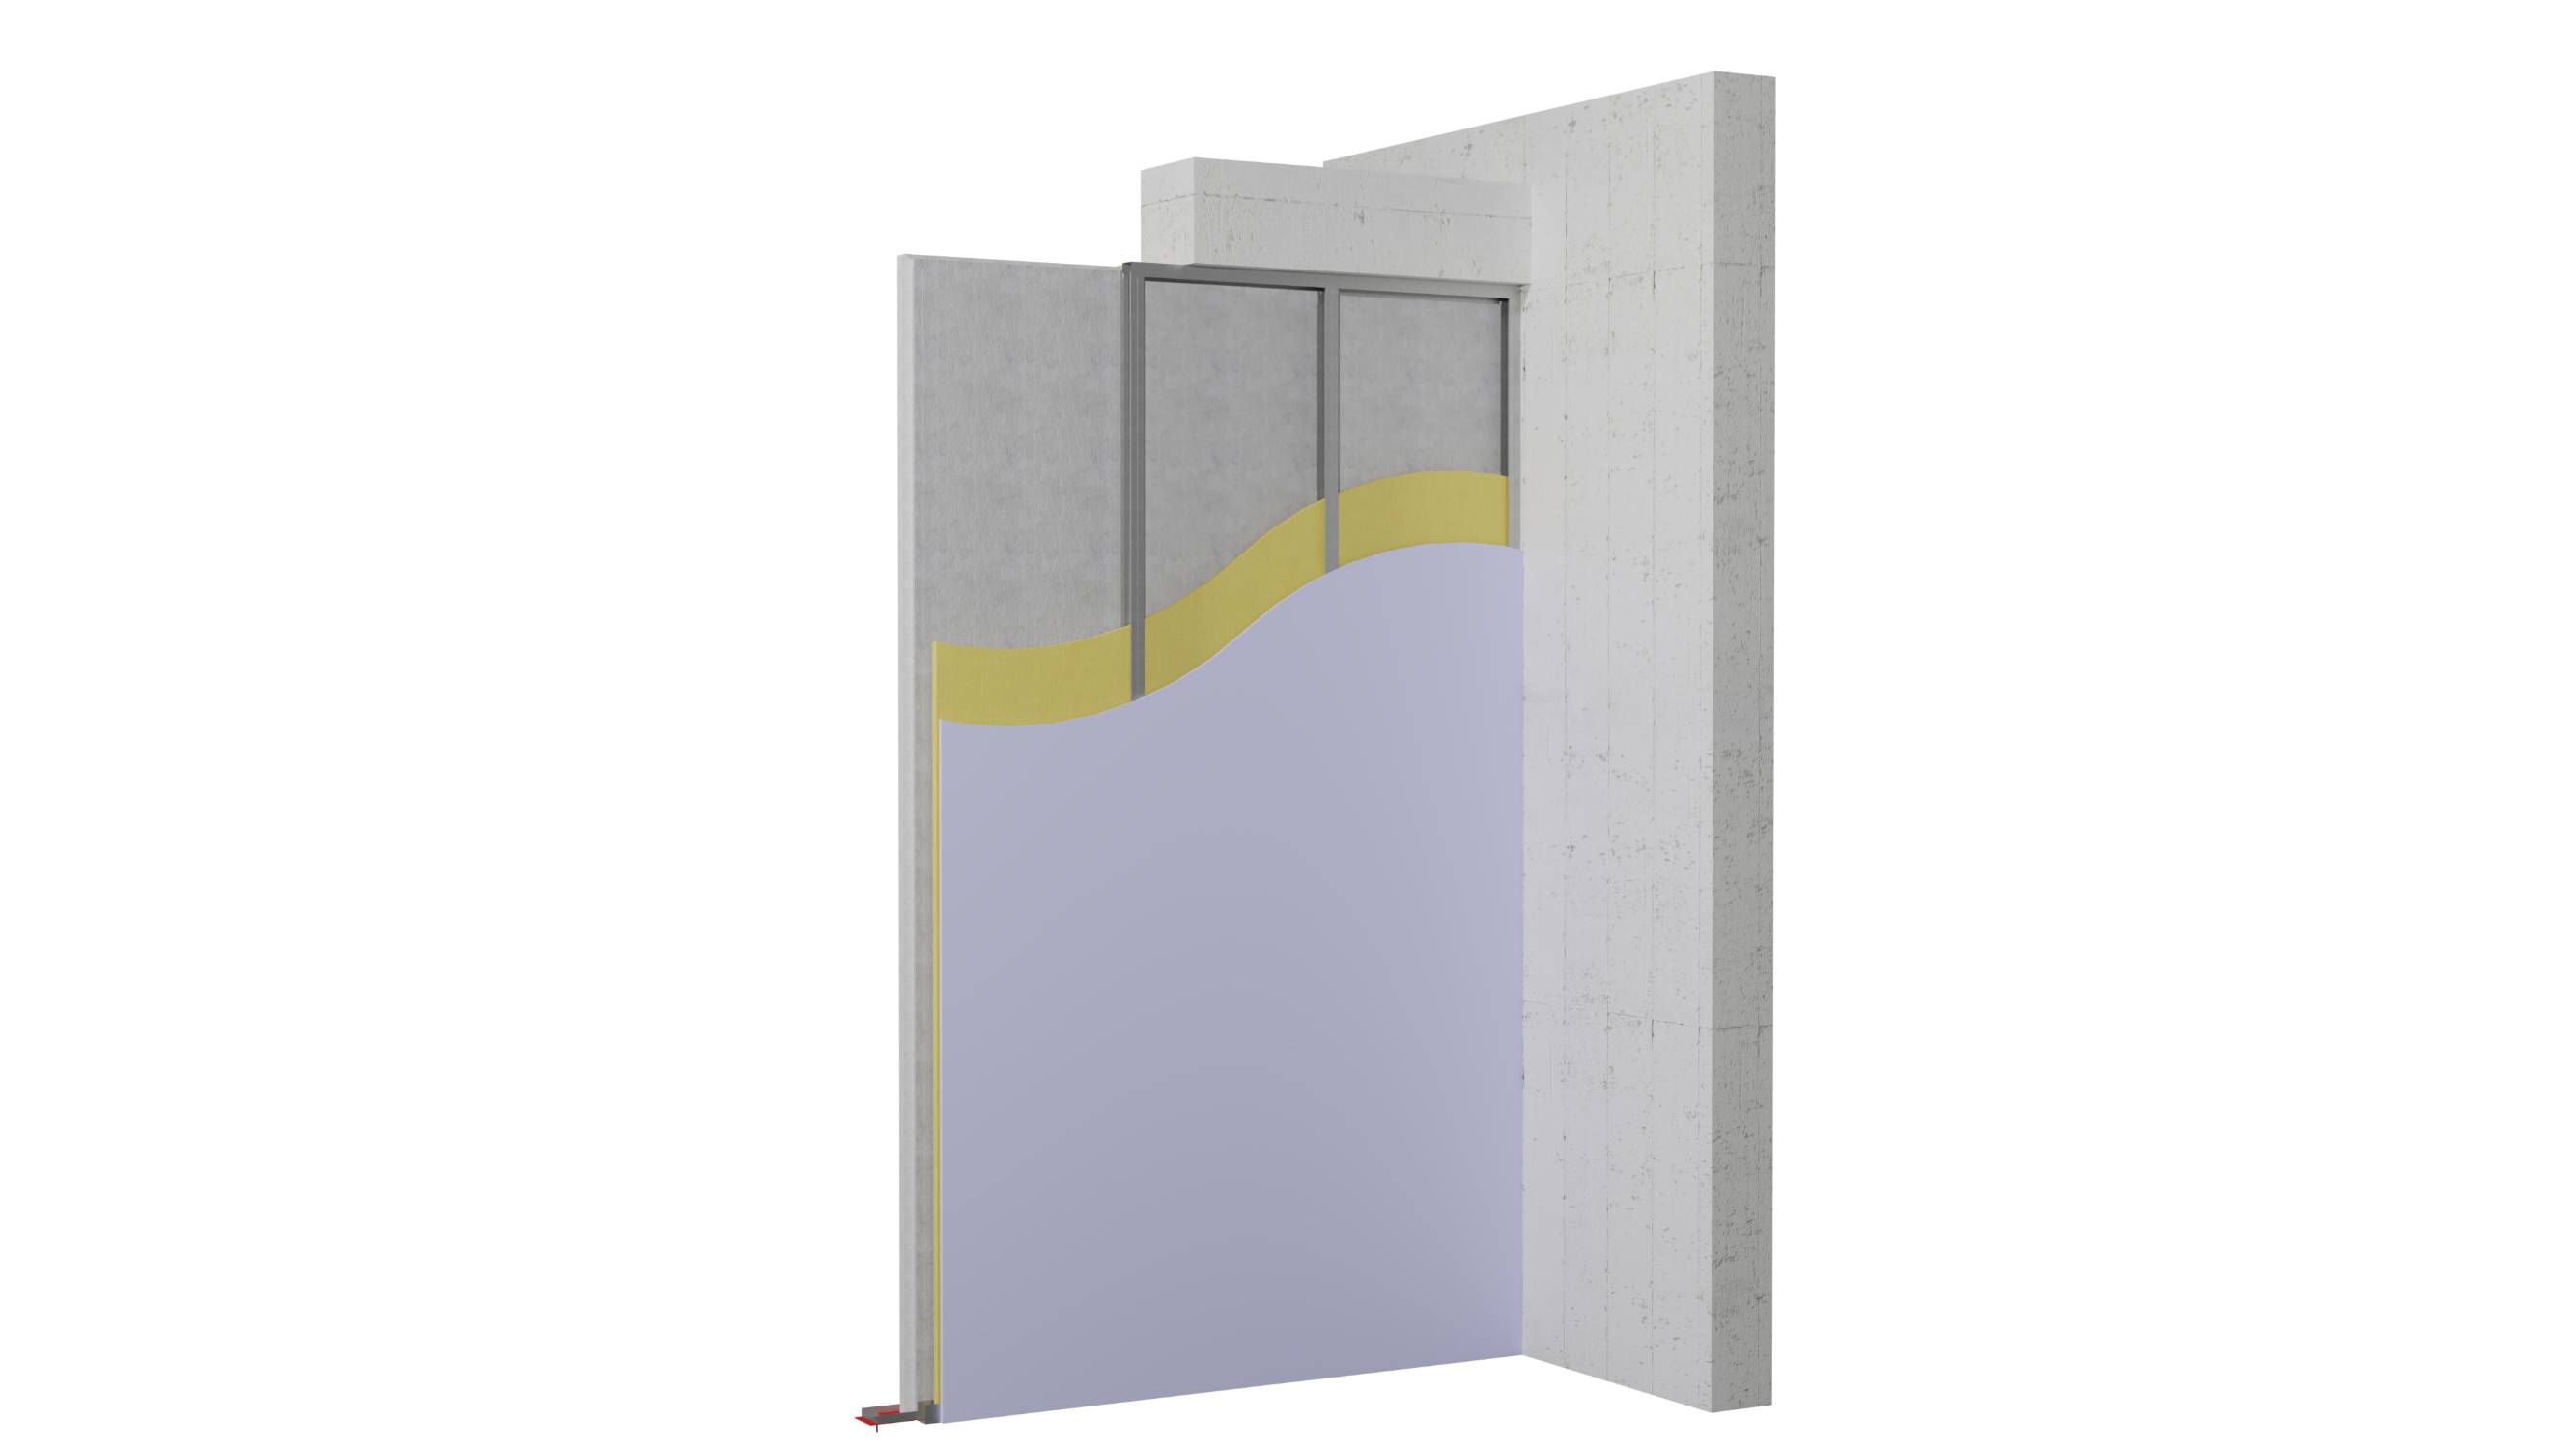 Hybrid Specwall HB008 (Acoustic & fire rated wall panel systems for internal separating walls) - Lightweight Concrete Panel